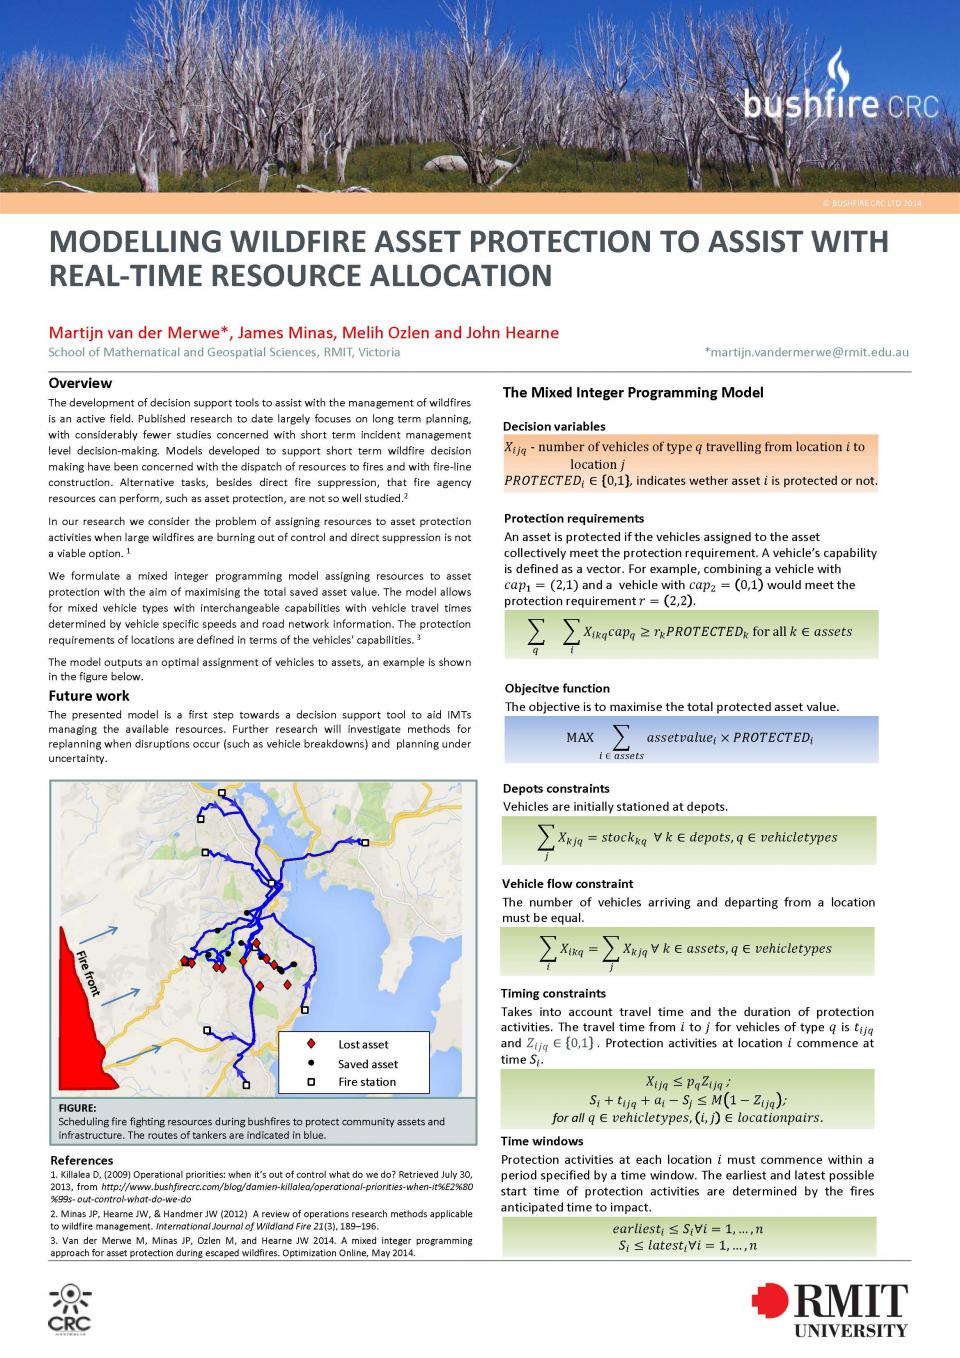 Modelling wildfire asset protection to assist with real-time resource allocation